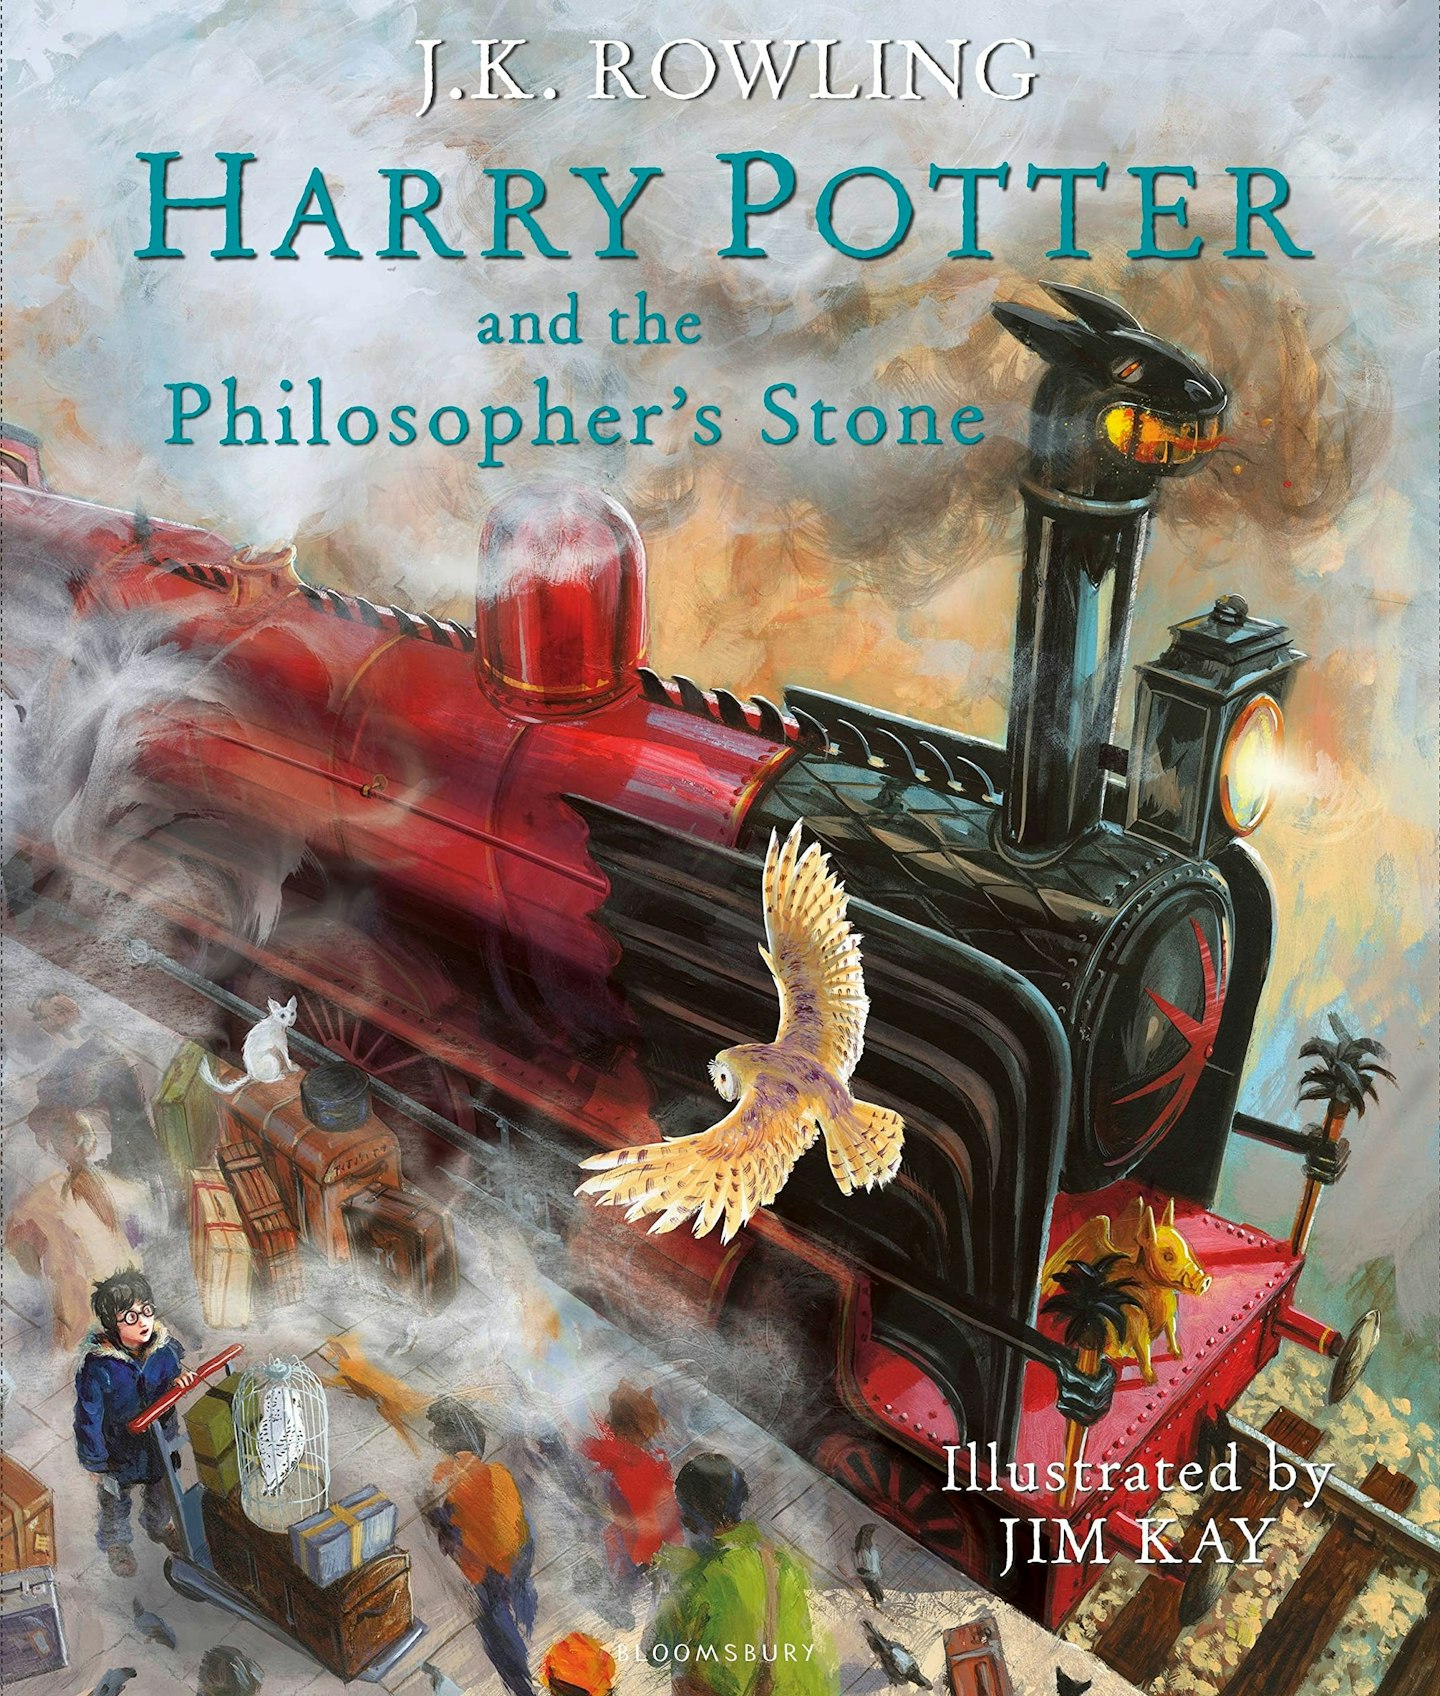 Harry Potter and the Philosopher’s Stone children's book